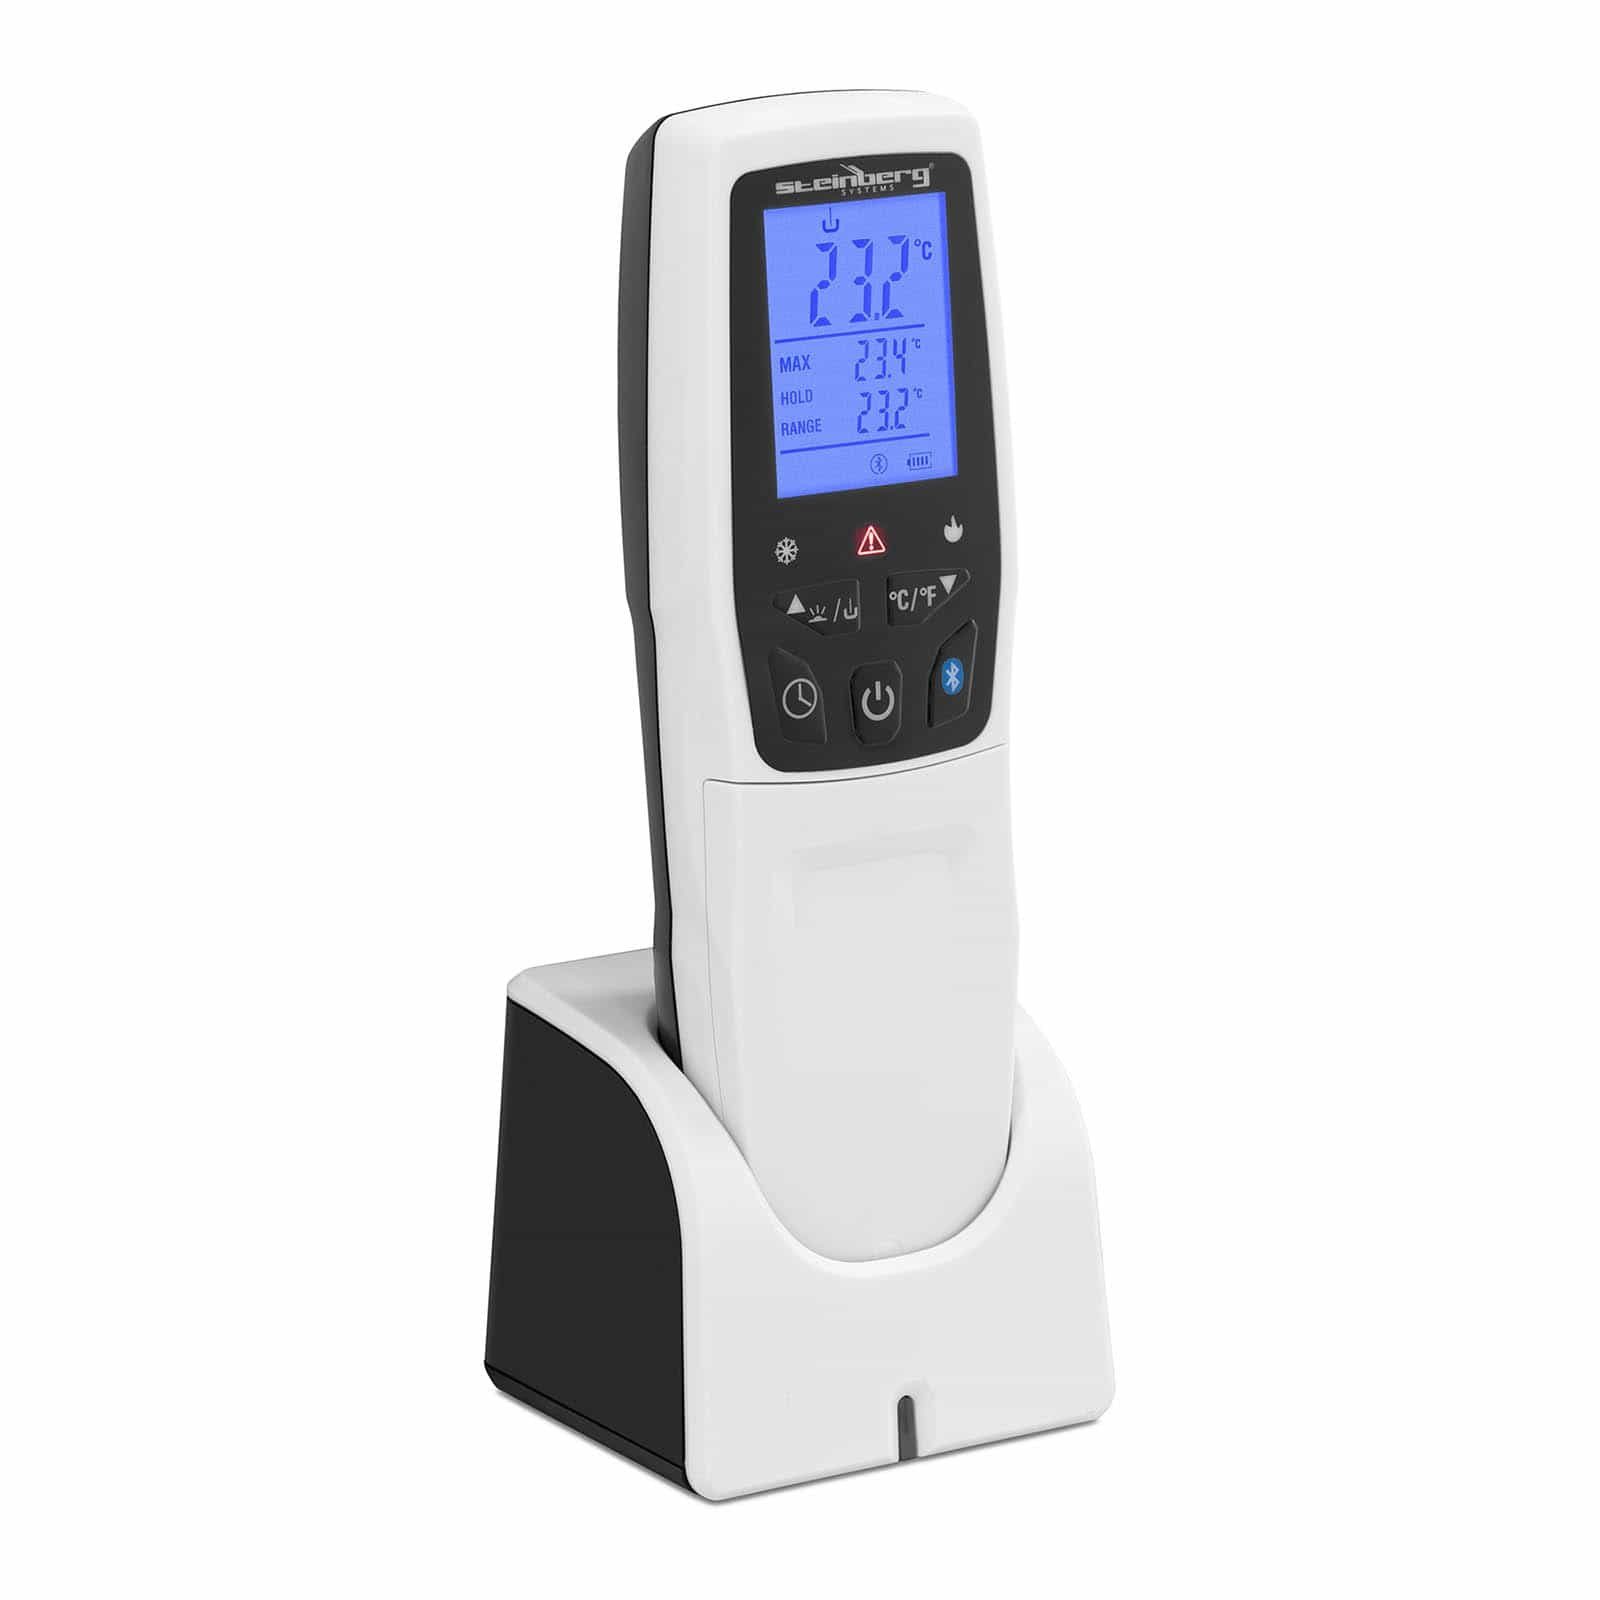 Thermometer Infrarot-Thermometer Lebensmittelthermometer Steinberg bis Infrarot 300 Systems °C -40 HACCP